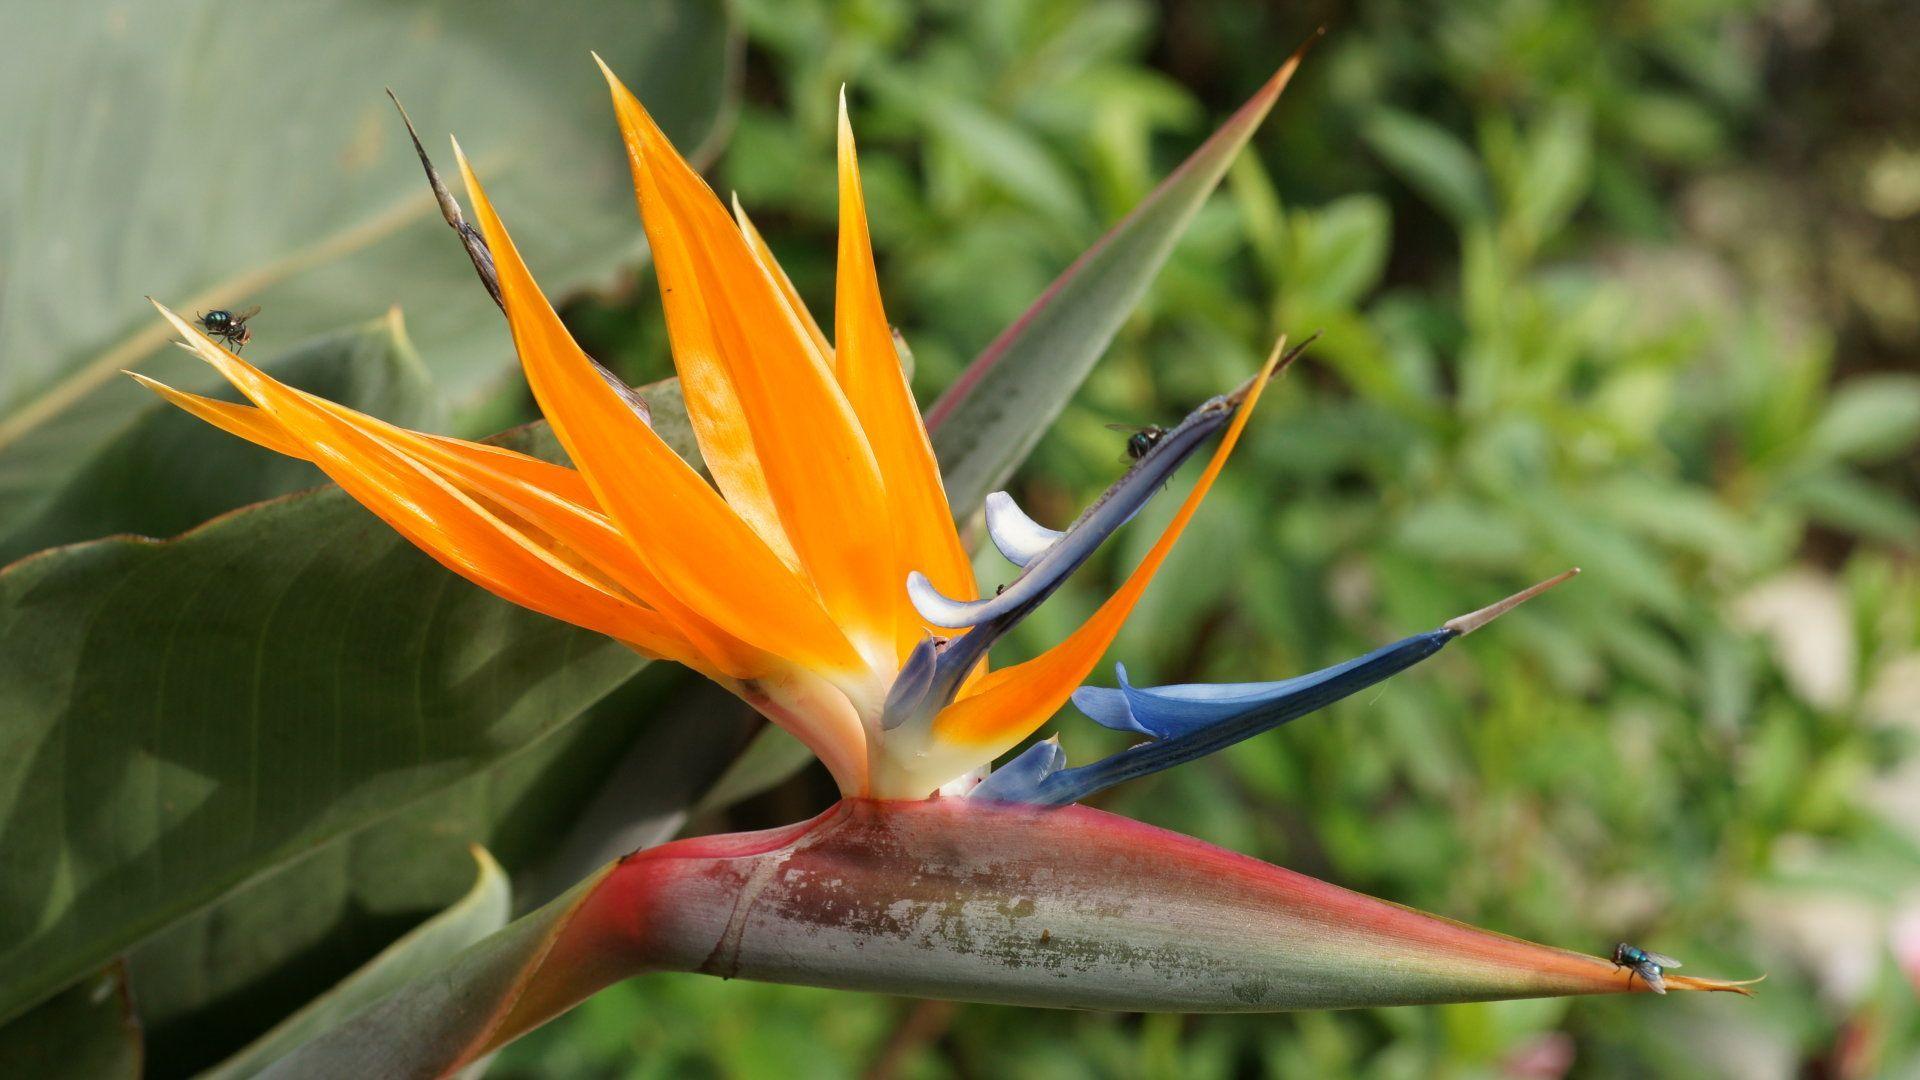 Insect Walk on Bird of Paradise Flower Wallpaper of High Resolution